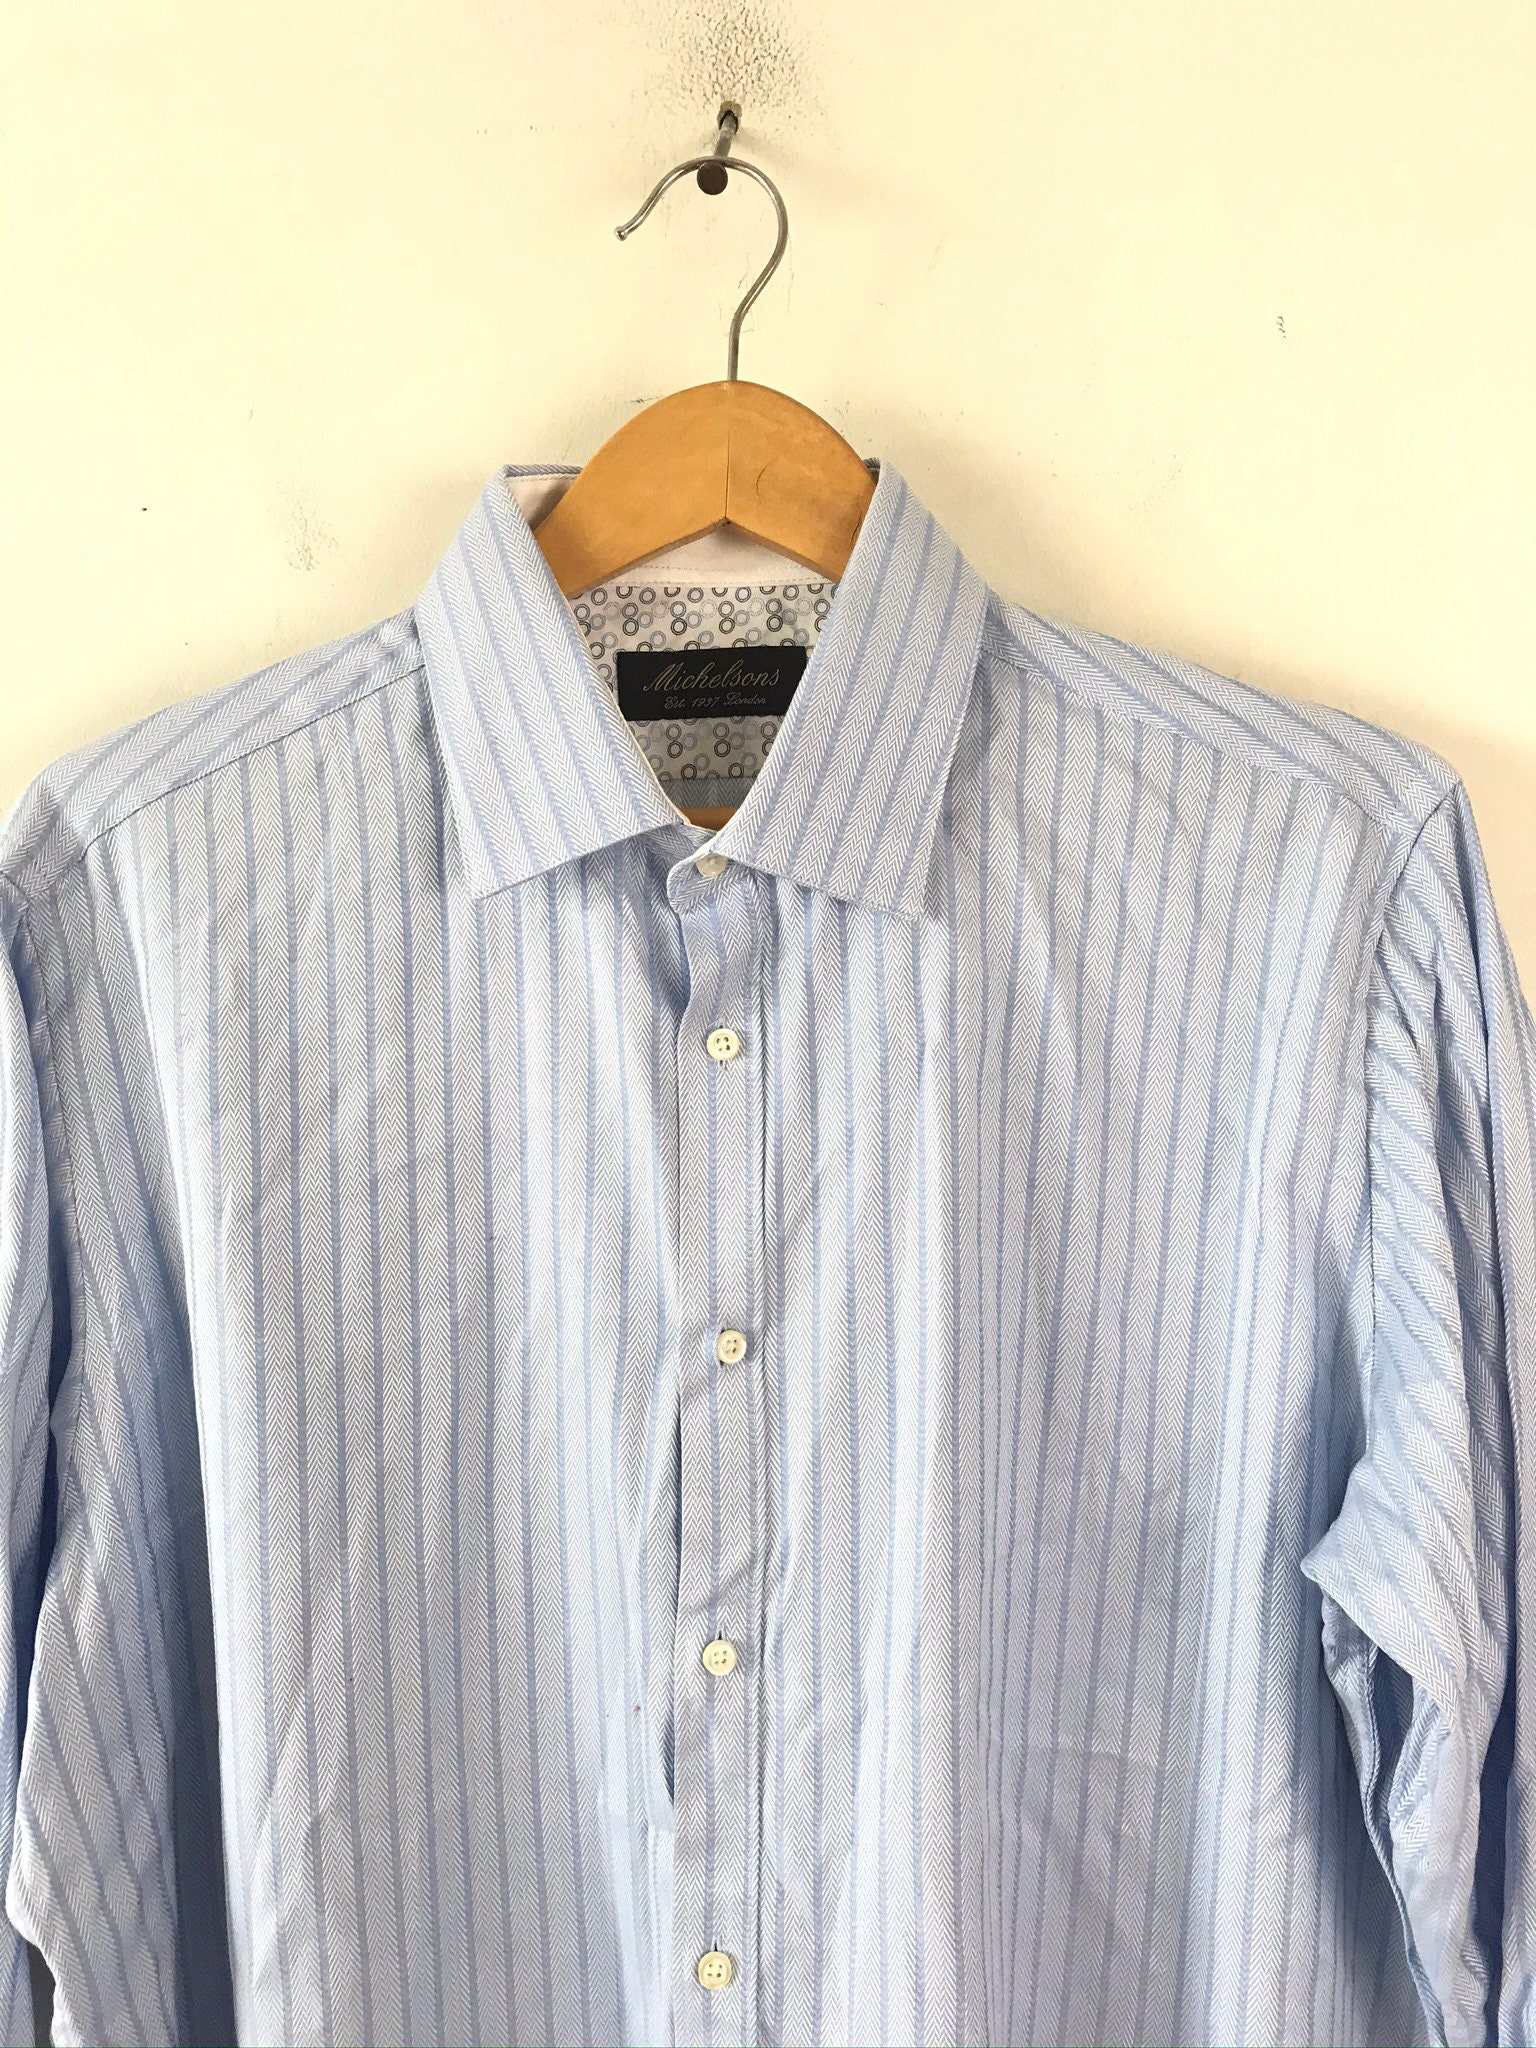 90s Light Blue Striped Contrast French Cuff Dress Shirt Mens - Etsy